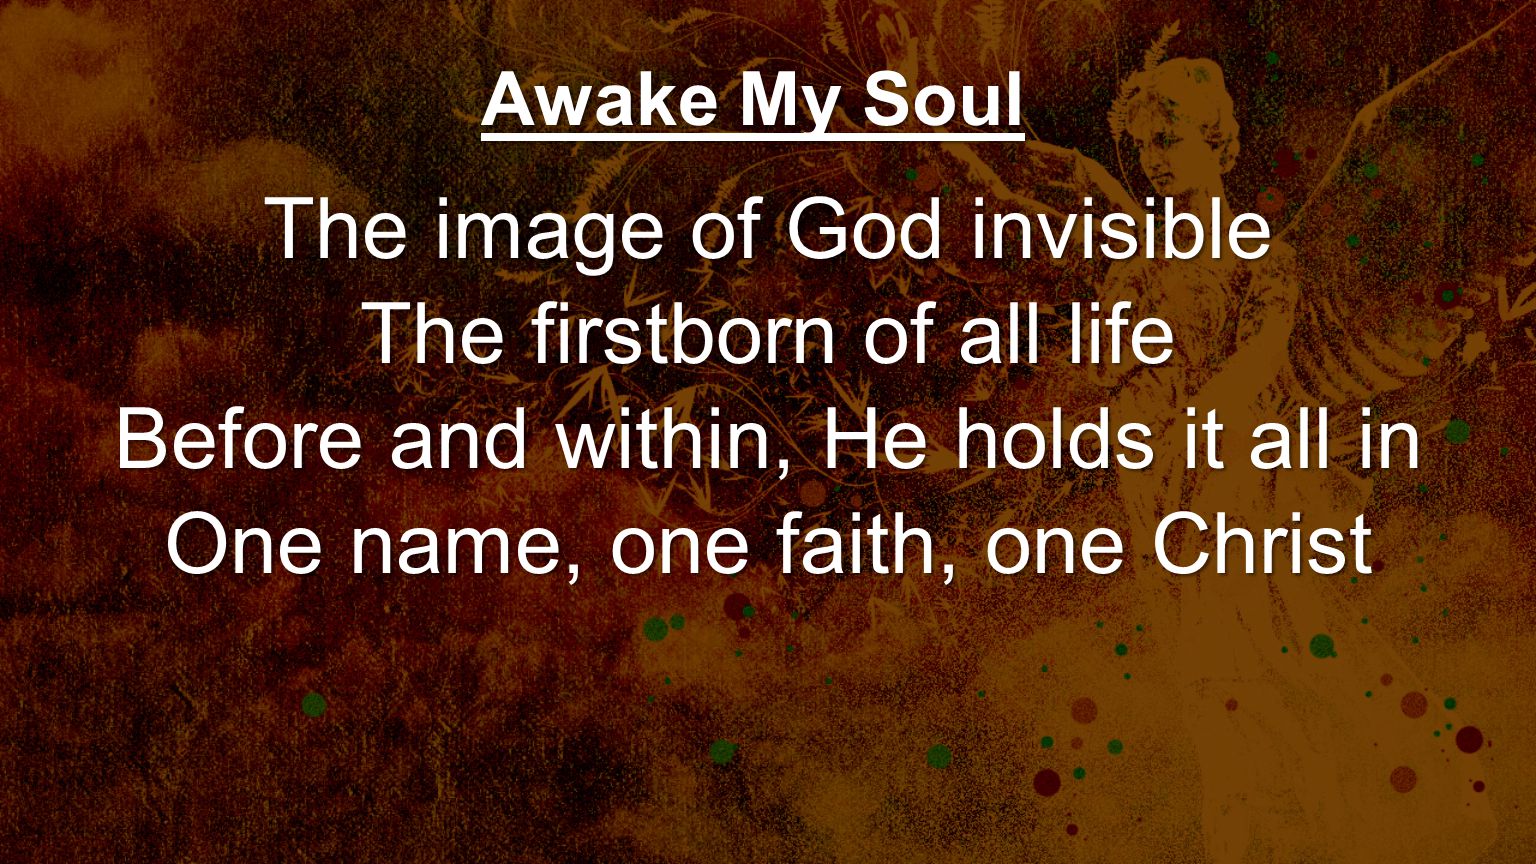 The image of God invisible The firstborn of all life Before and within, He holds it all in One name, one faith, one Christ Awake My Soul